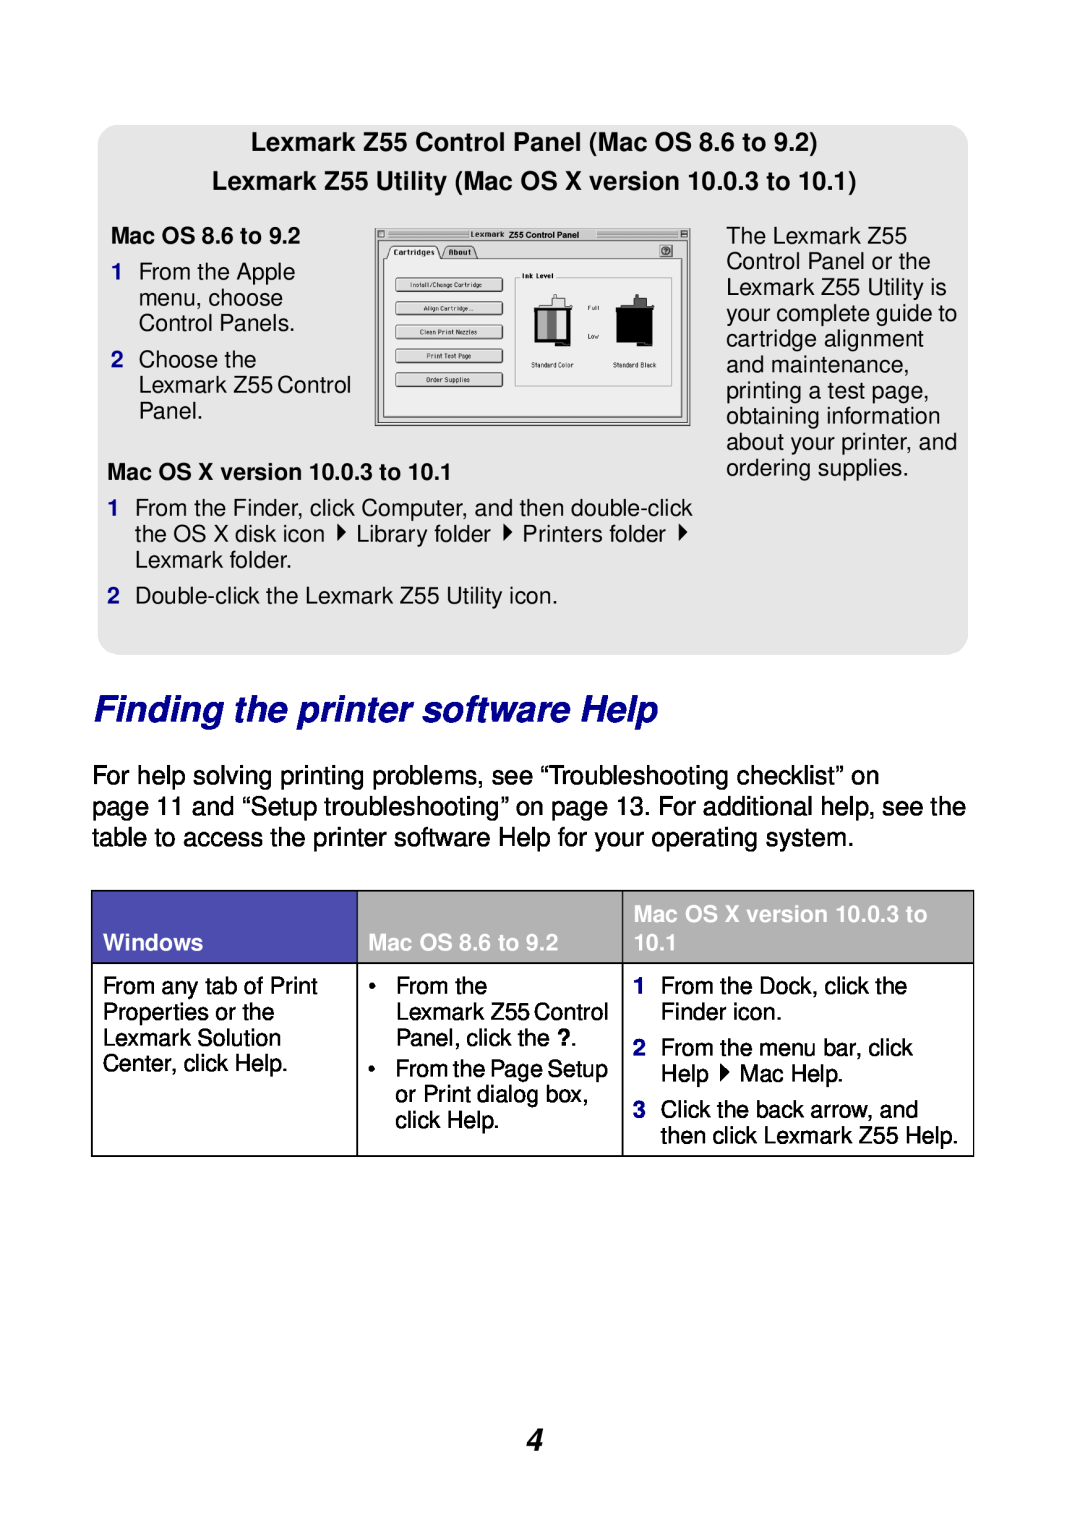 Lexmark manual Finding the printer software Help, Lexmark Z55 Control Panel Mac OS 8.6 to 